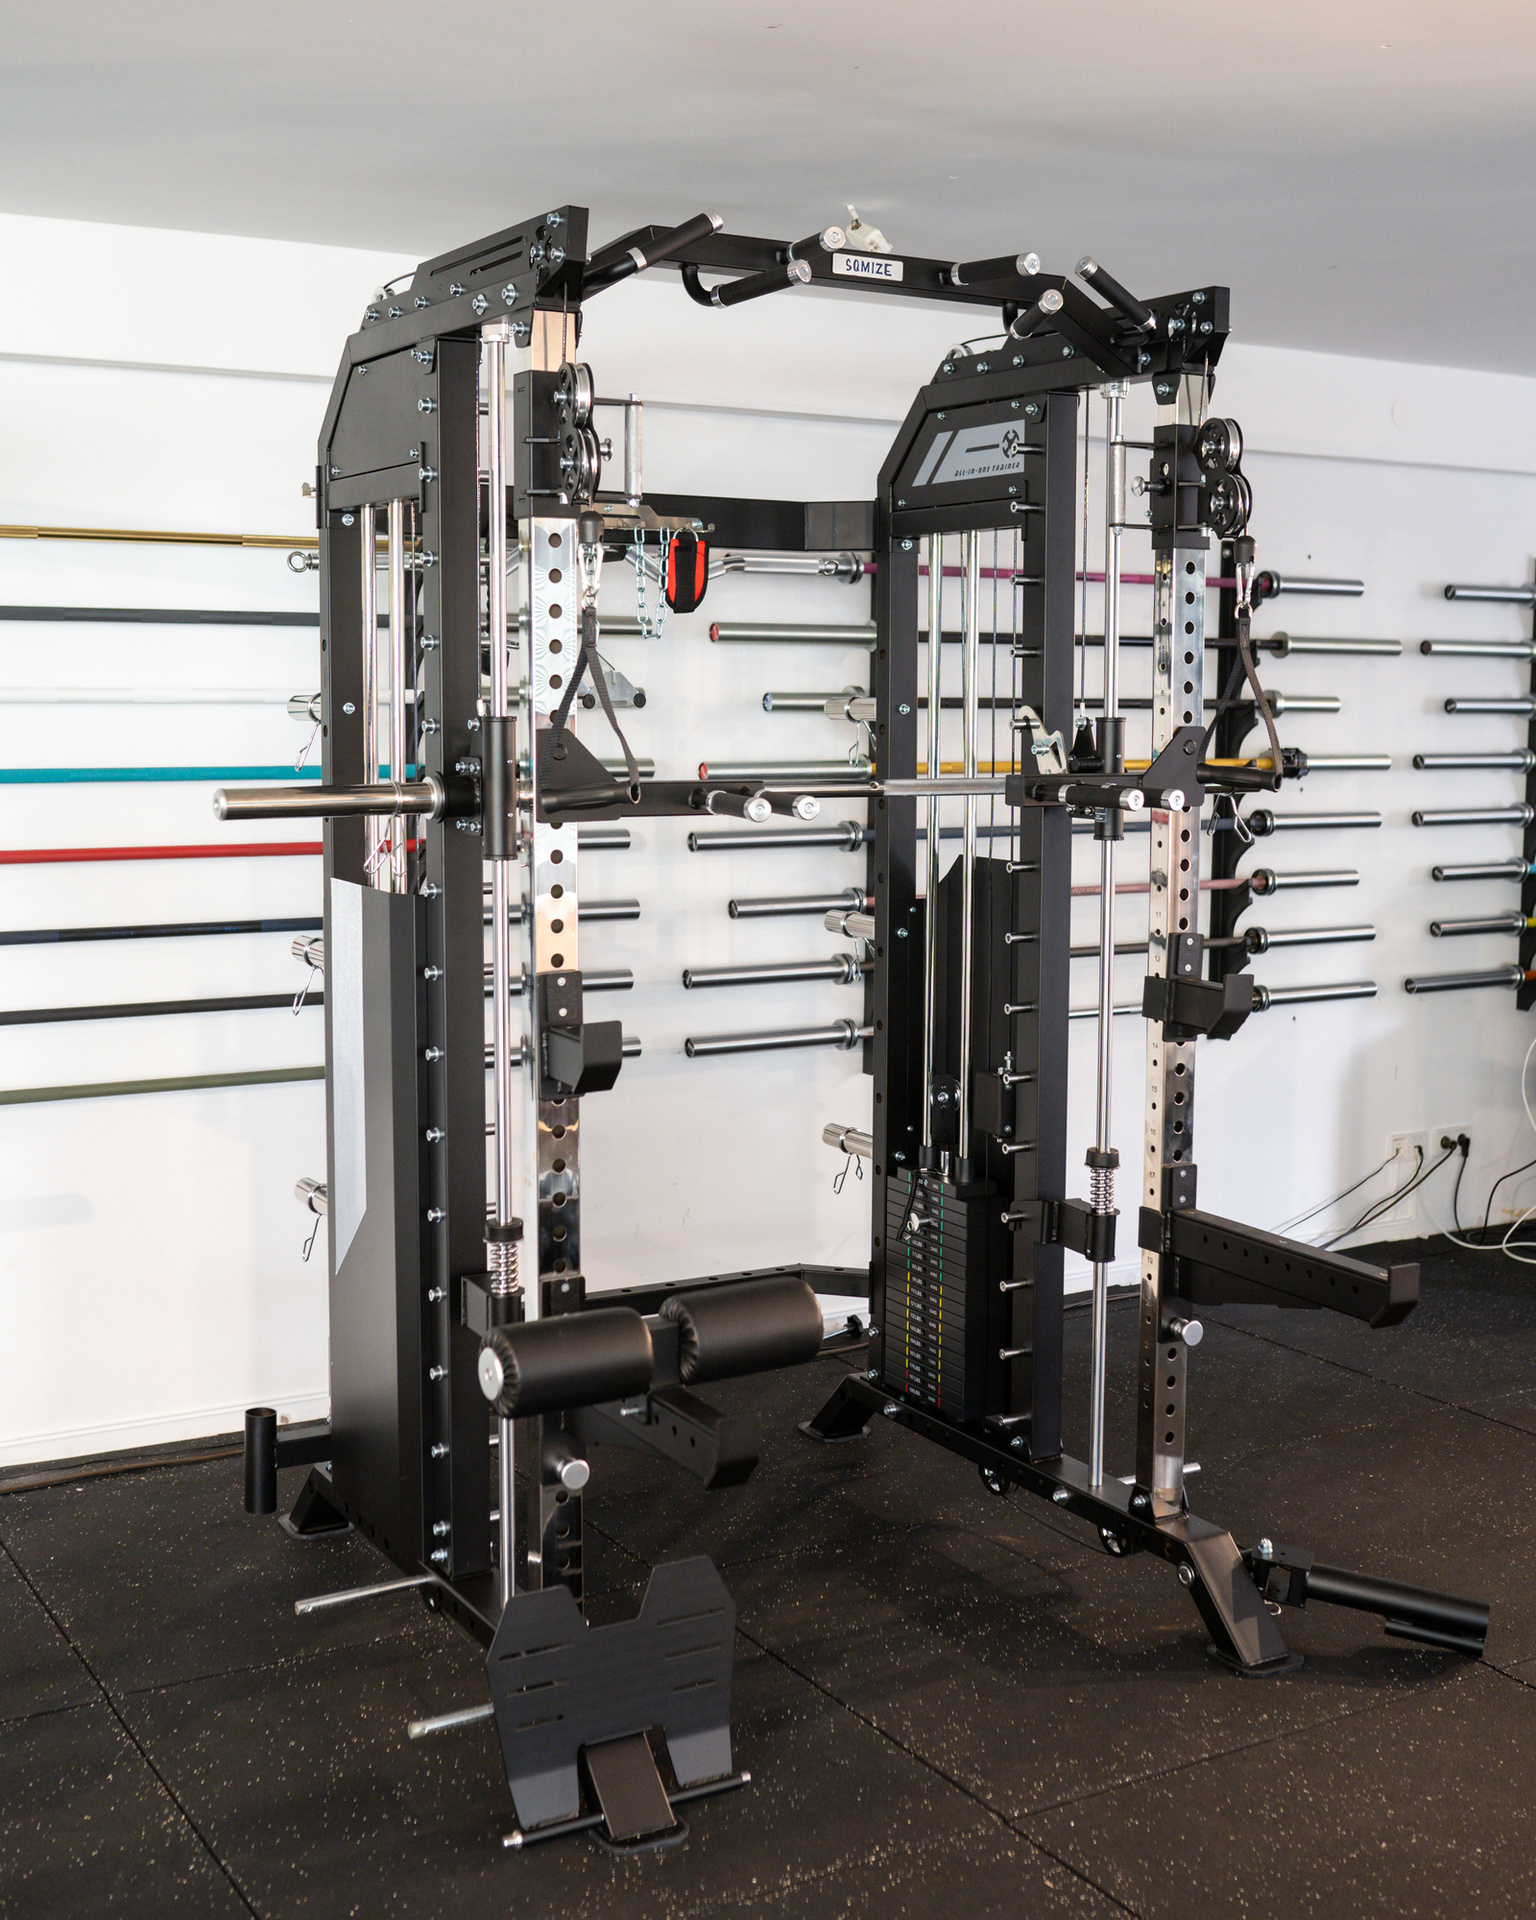 Monster Power Gym All-in-One SQMIZE® PREMIUM BISON SQ-S991